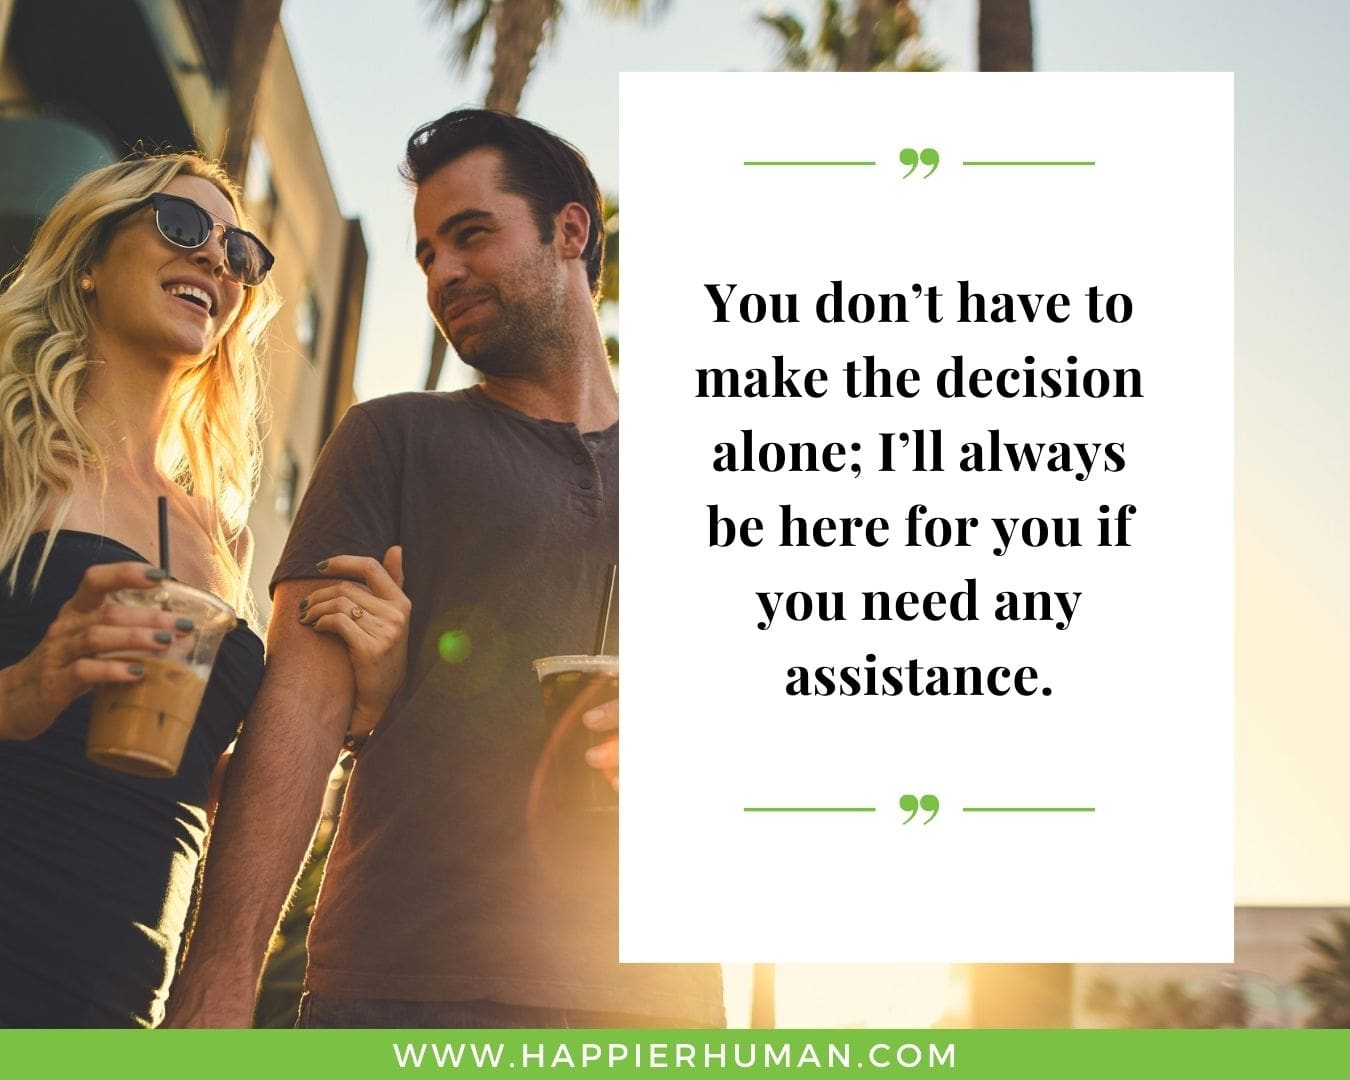 I’m Here for You Quotes - “You don’t have to make the decision alone; I’ll always be here for you if you need any assistance.”